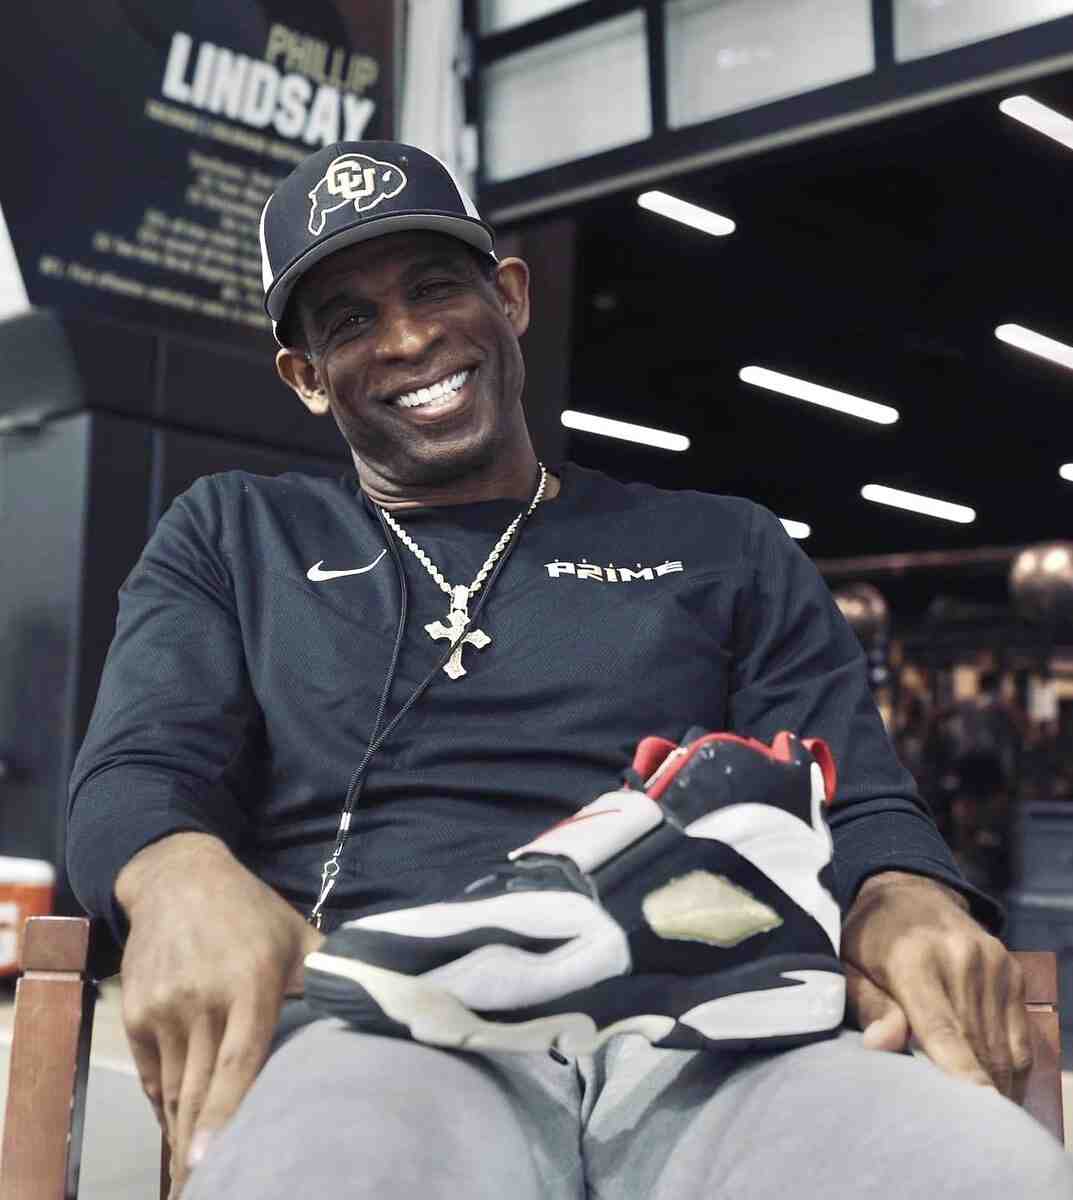 Deion Sanders Re-Signs With Nike